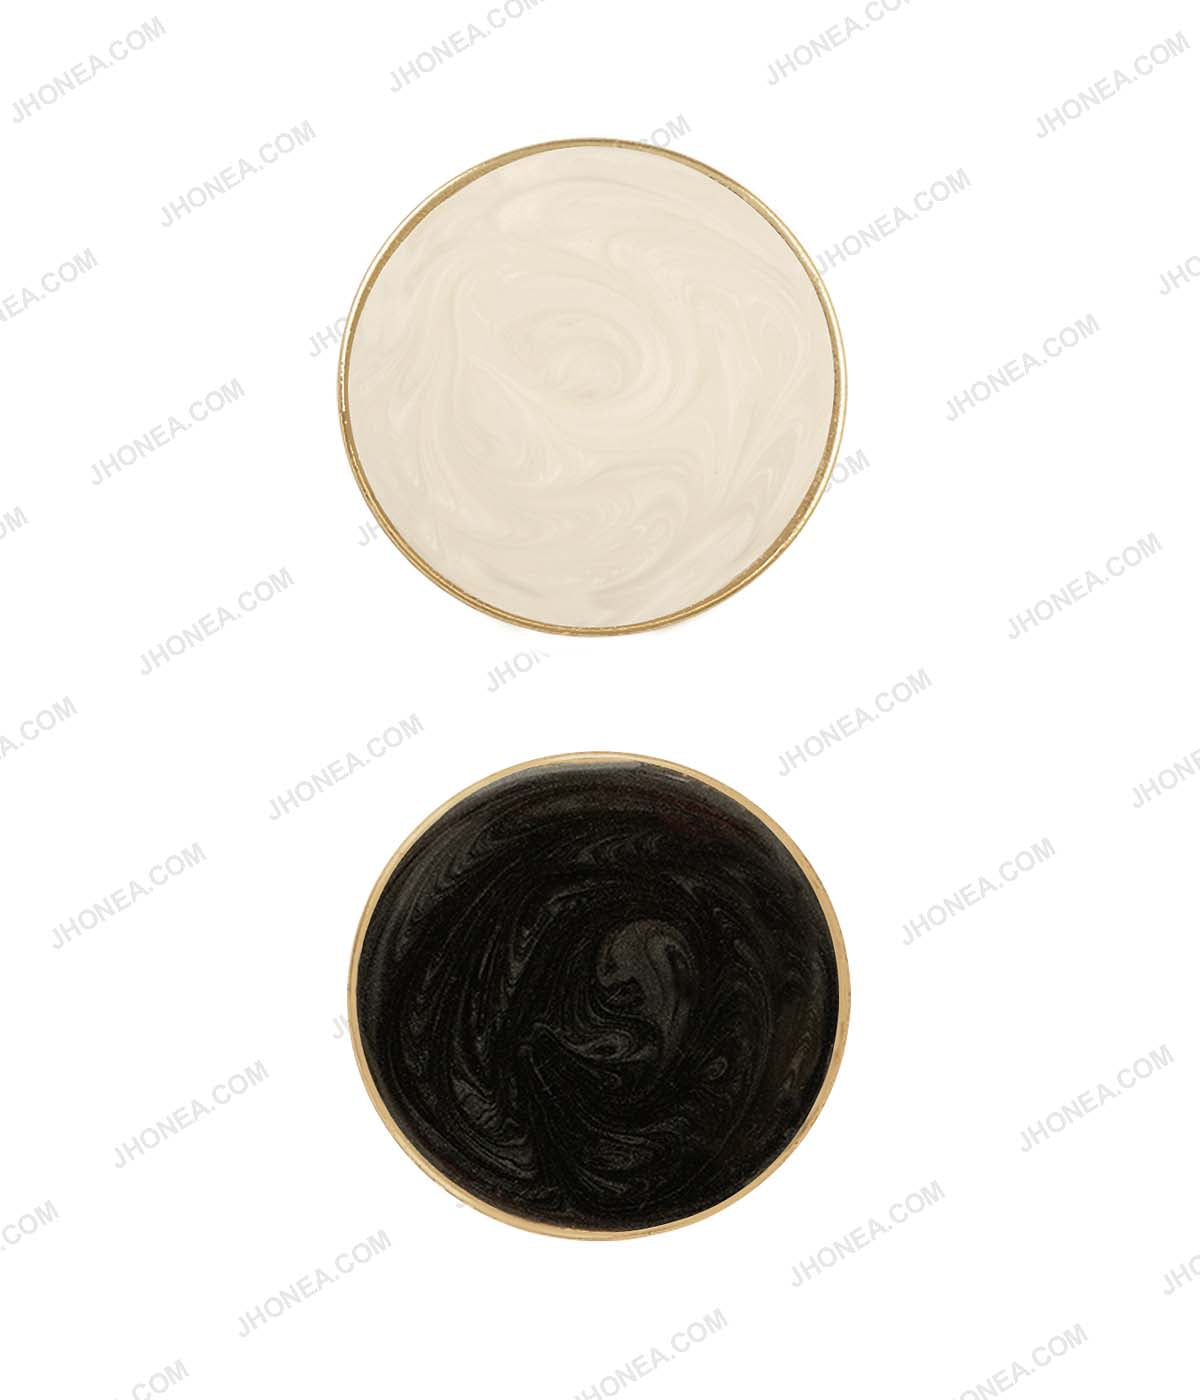 Buy Online Blazer Buttons & Coat Buttons on Jhonea – Tagged 20mm